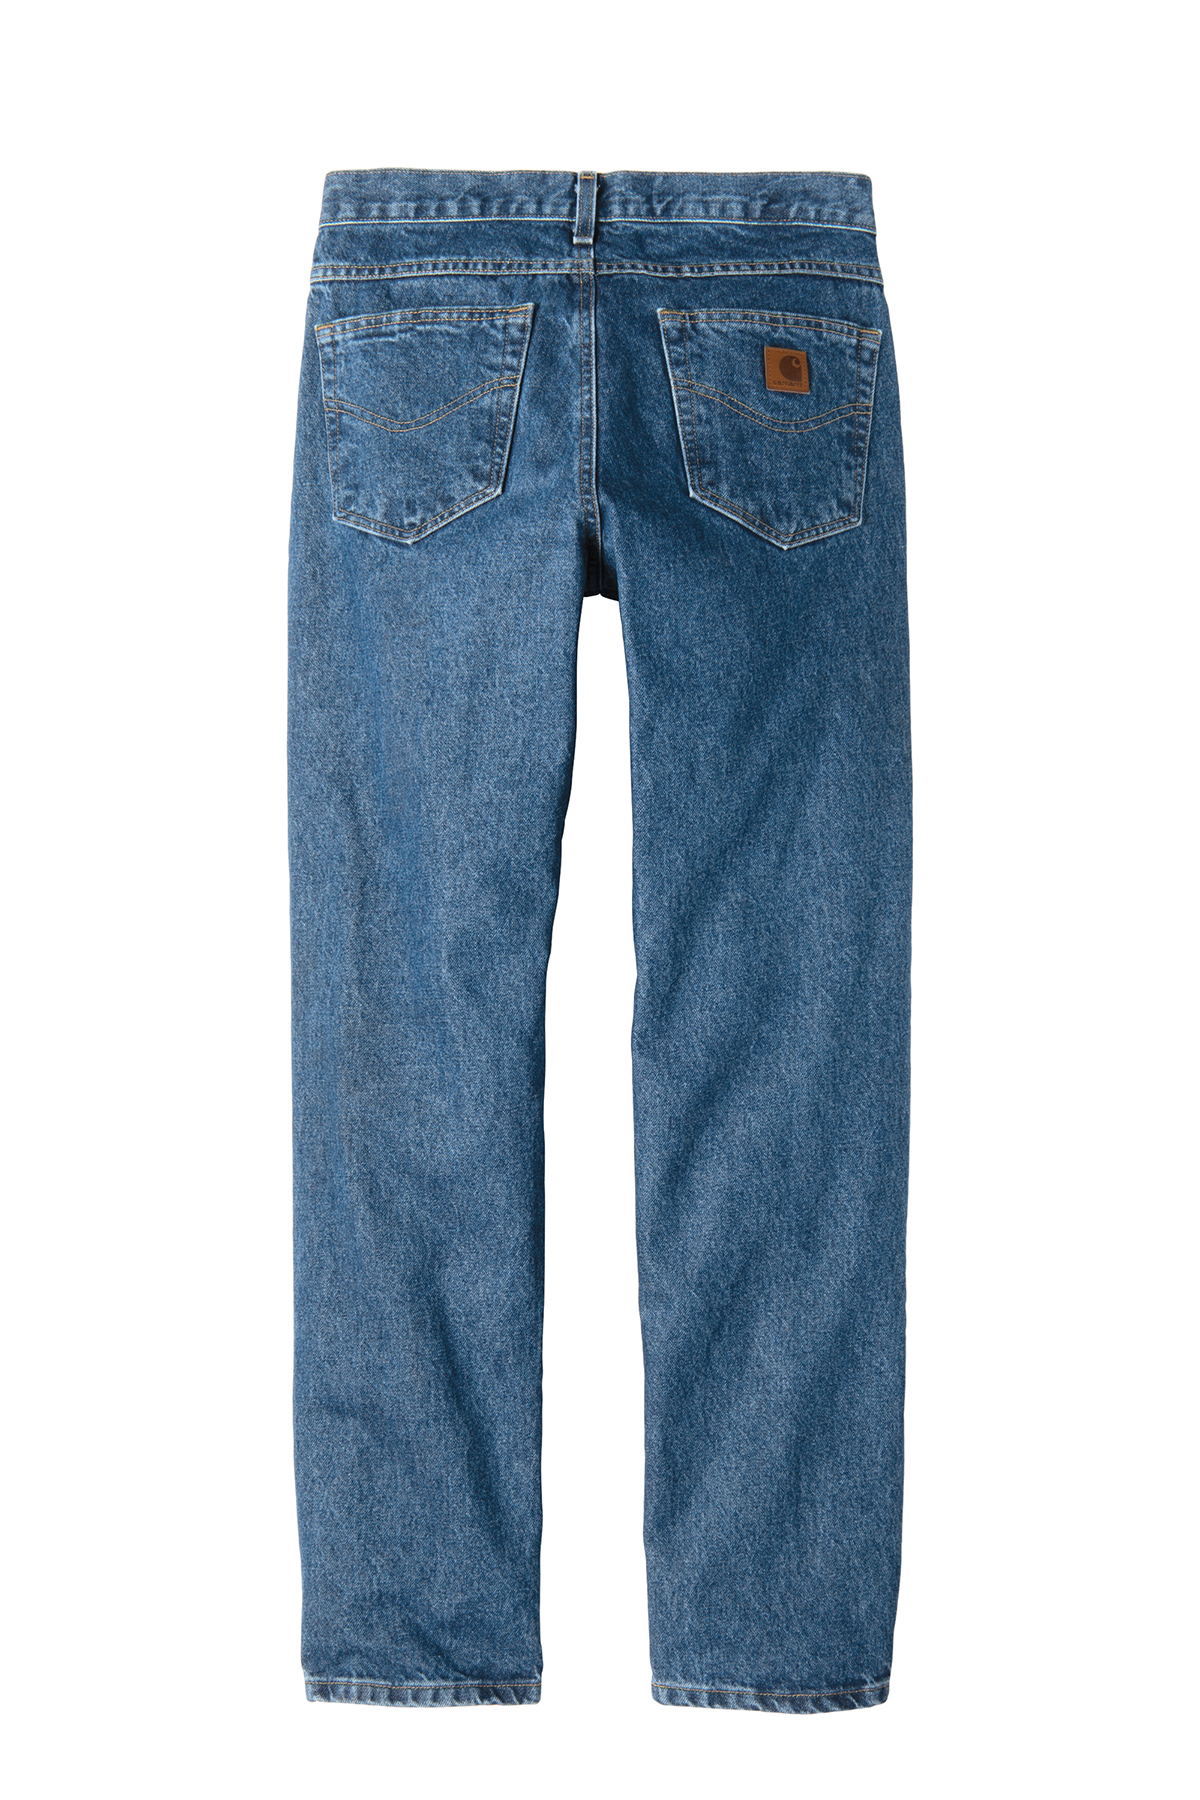 carhartt relaxed fit tapered leg jean